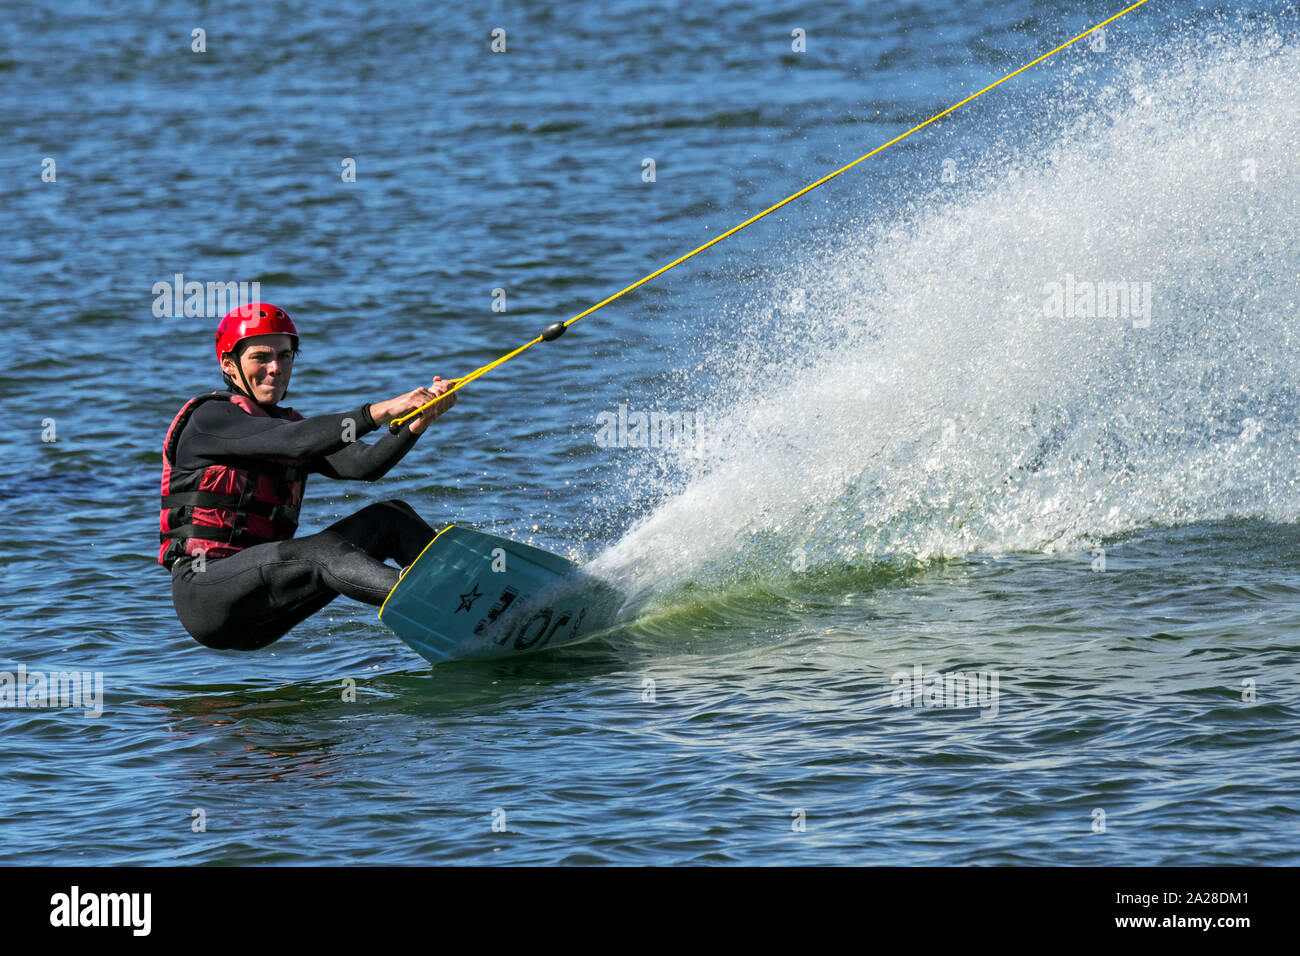 Wakeboarder / rider riding wakeboard towed by electrically-driven cable at cable ski course / wakeboard park Stock Photo